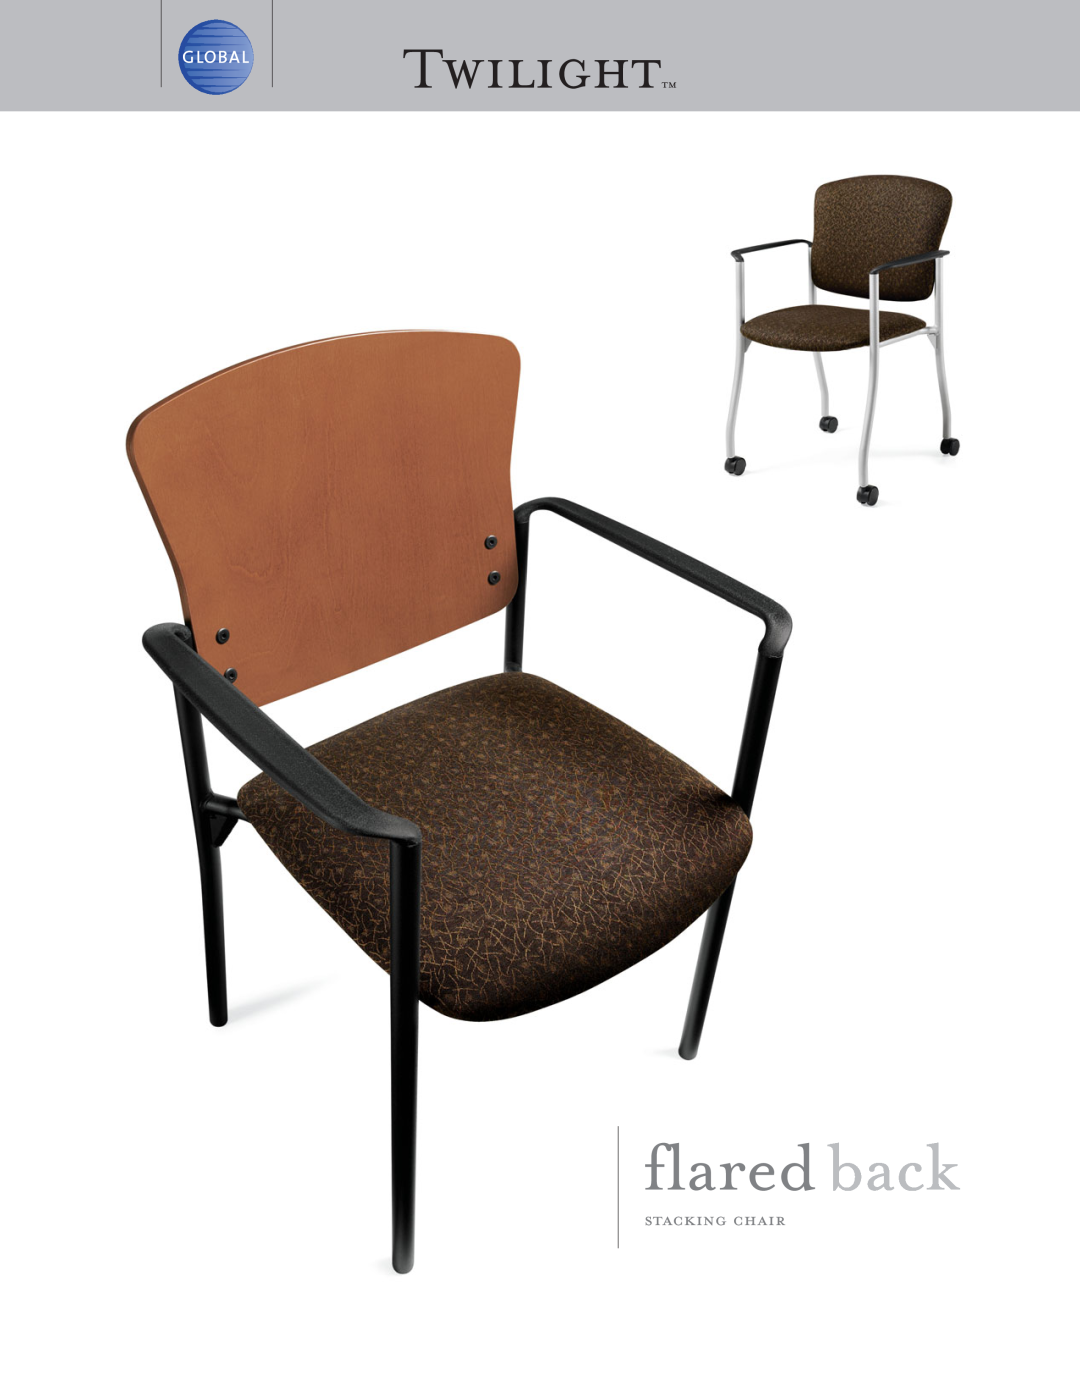 Global Upholstery Co Stacking Chair manual Twilighttm, flared back, stacking chair 